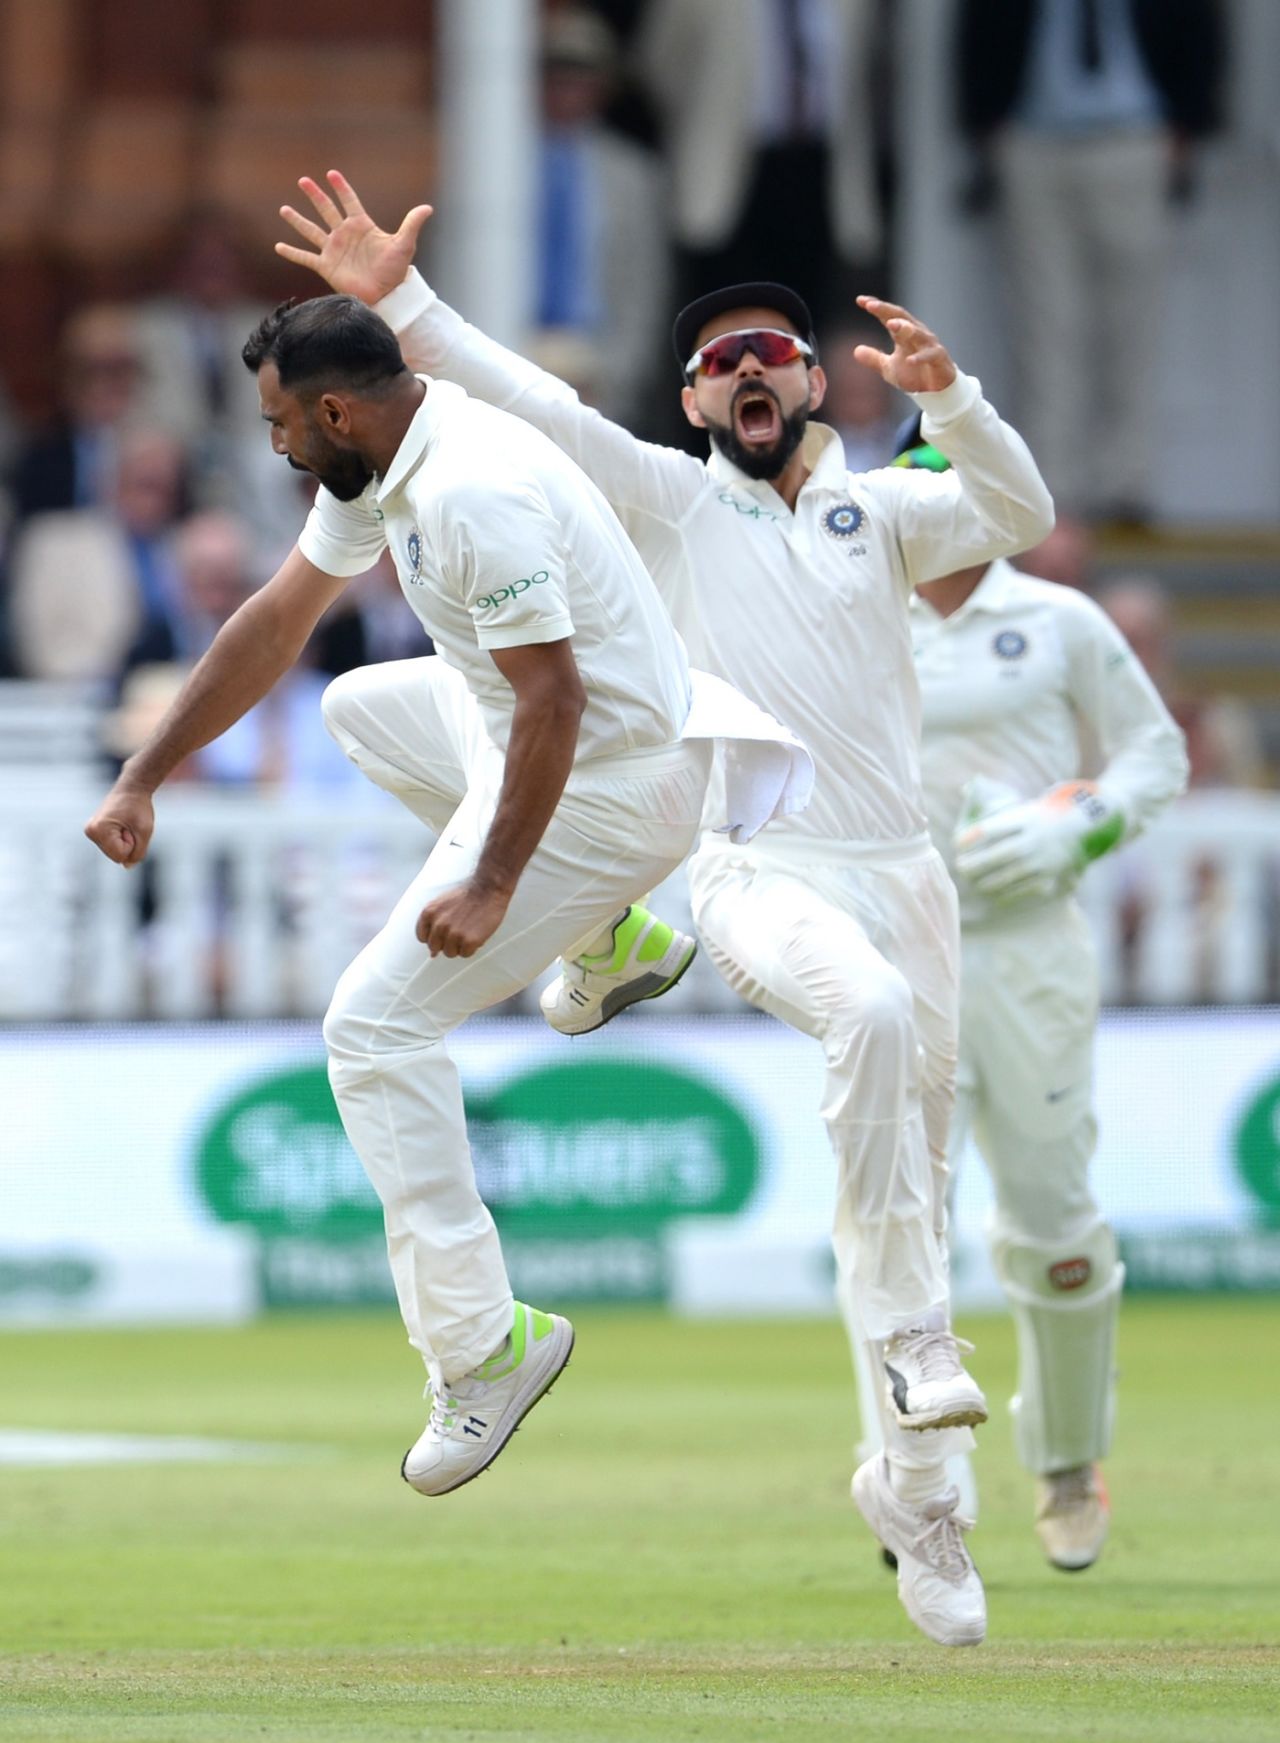 Mohammed Shami and Virat Kohli celebrate a wicket, England v India, 2nd Test, Lord's, 3rd day, August 11, 2018